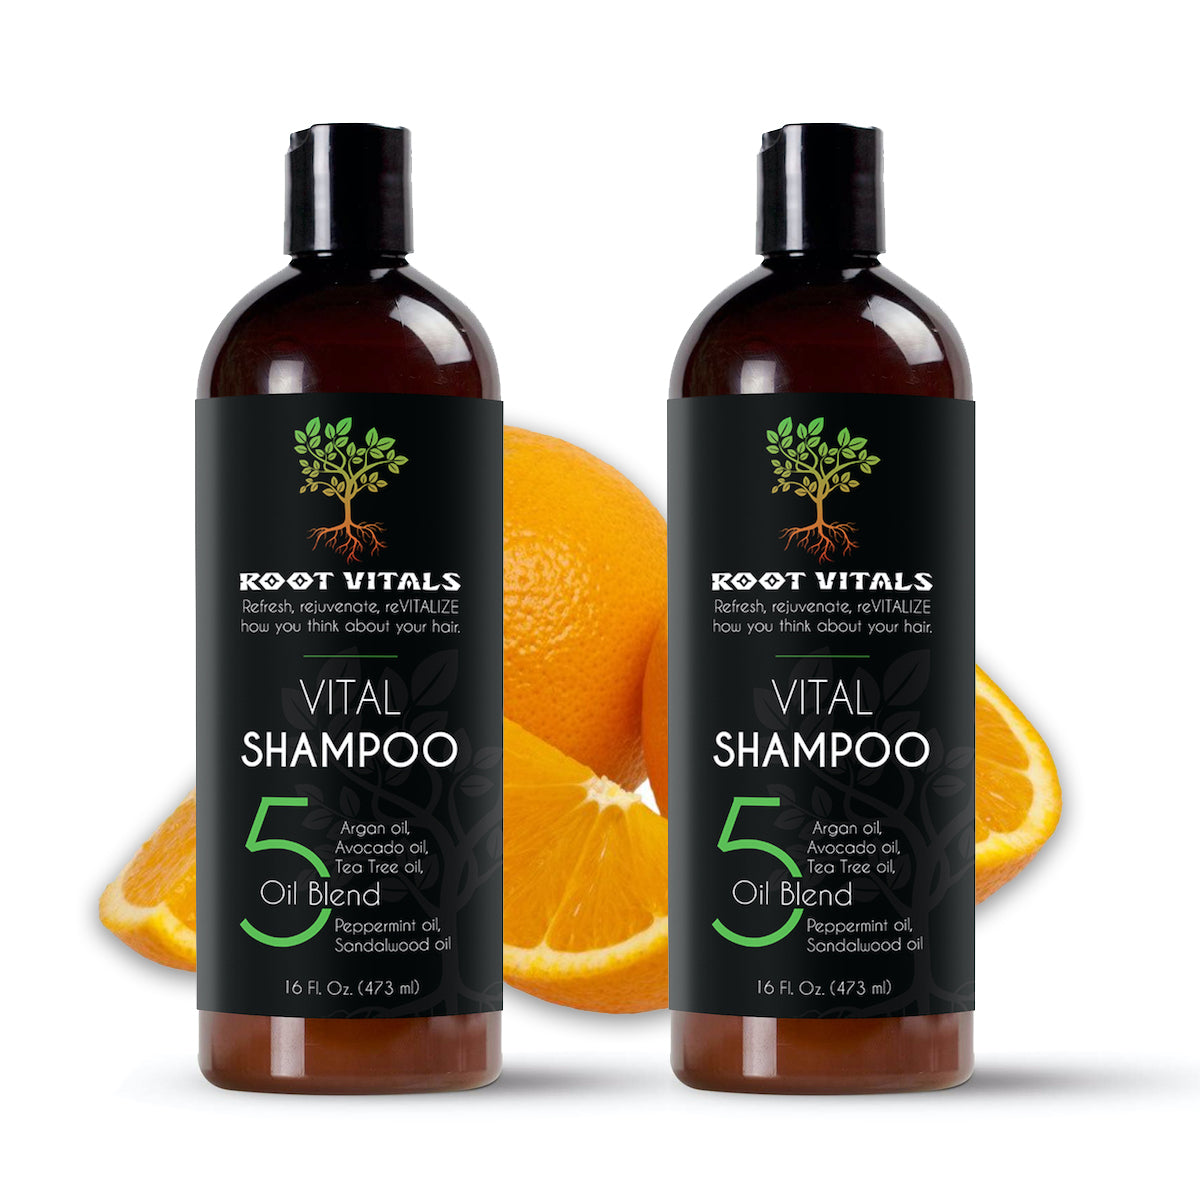 Two 160 Orange scented ounce bottles of Natural Hair Growth Shampoo